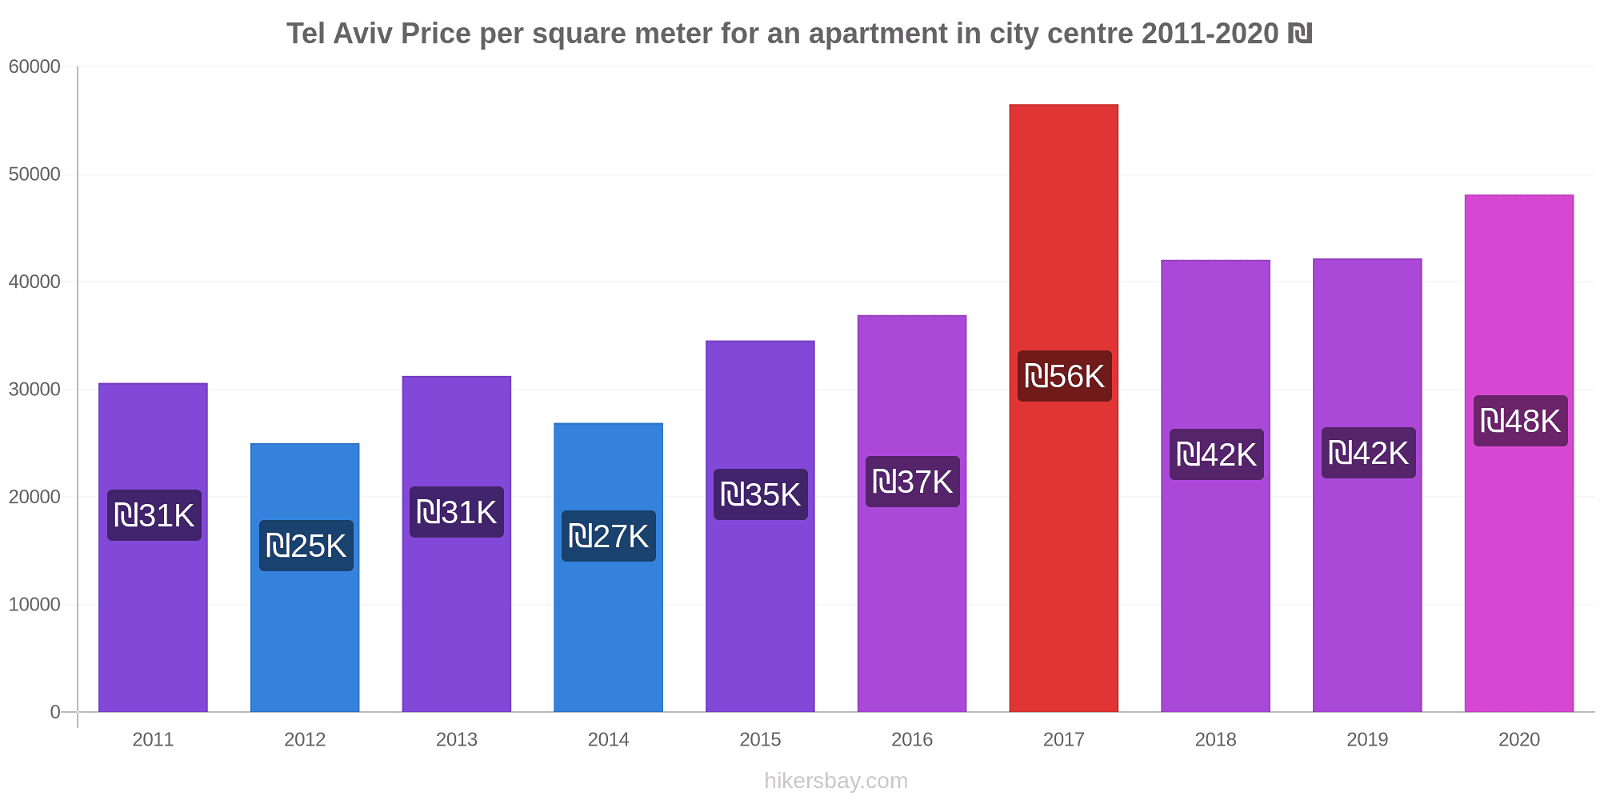 Tel Aviv price changes Price per square meter for an apartment in city centre hikersbay.com